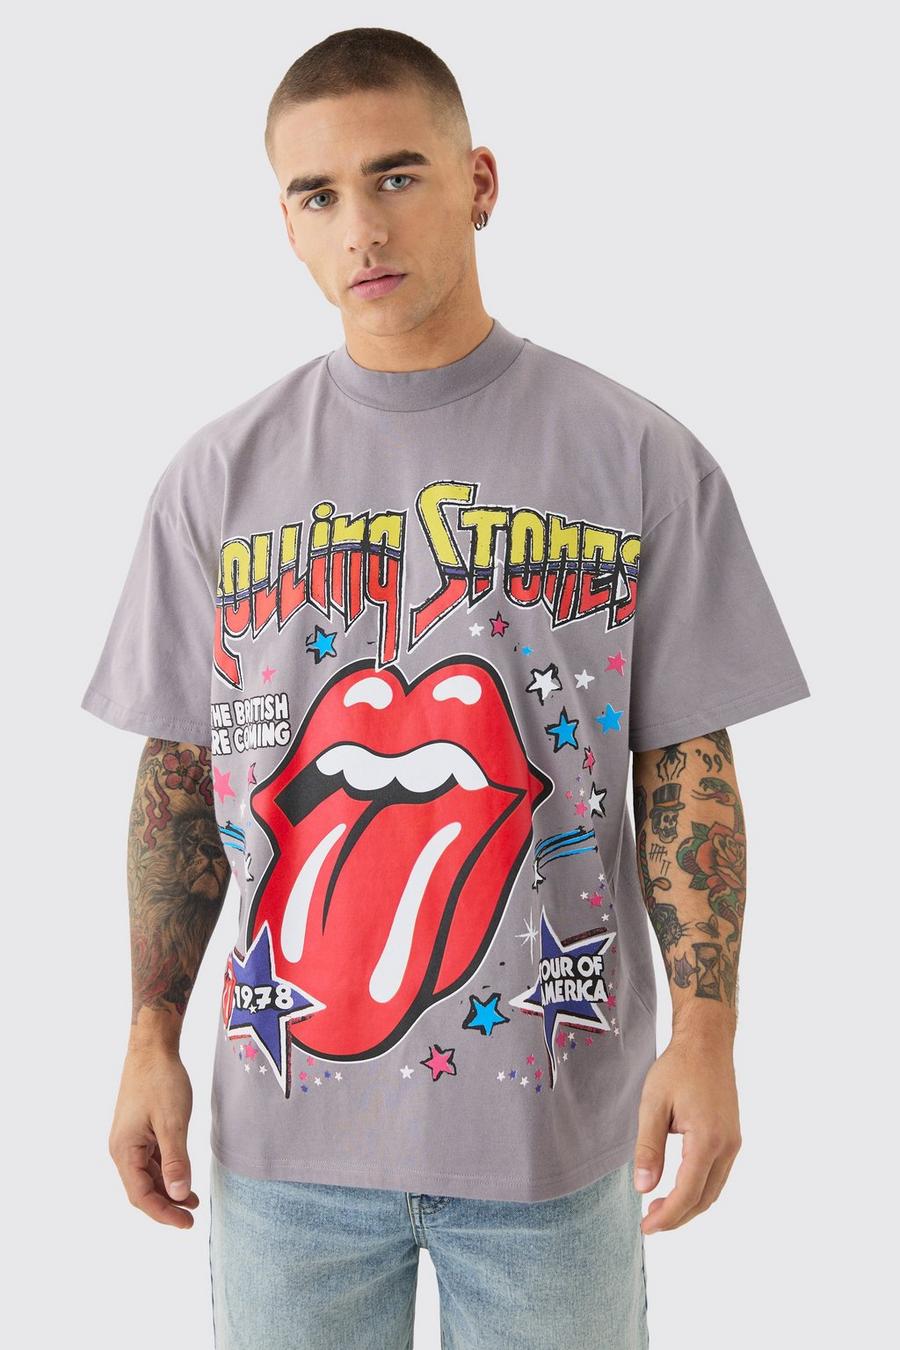 T-shirt oversize ufficiale Rolling Stones in grande formato, Charcoal